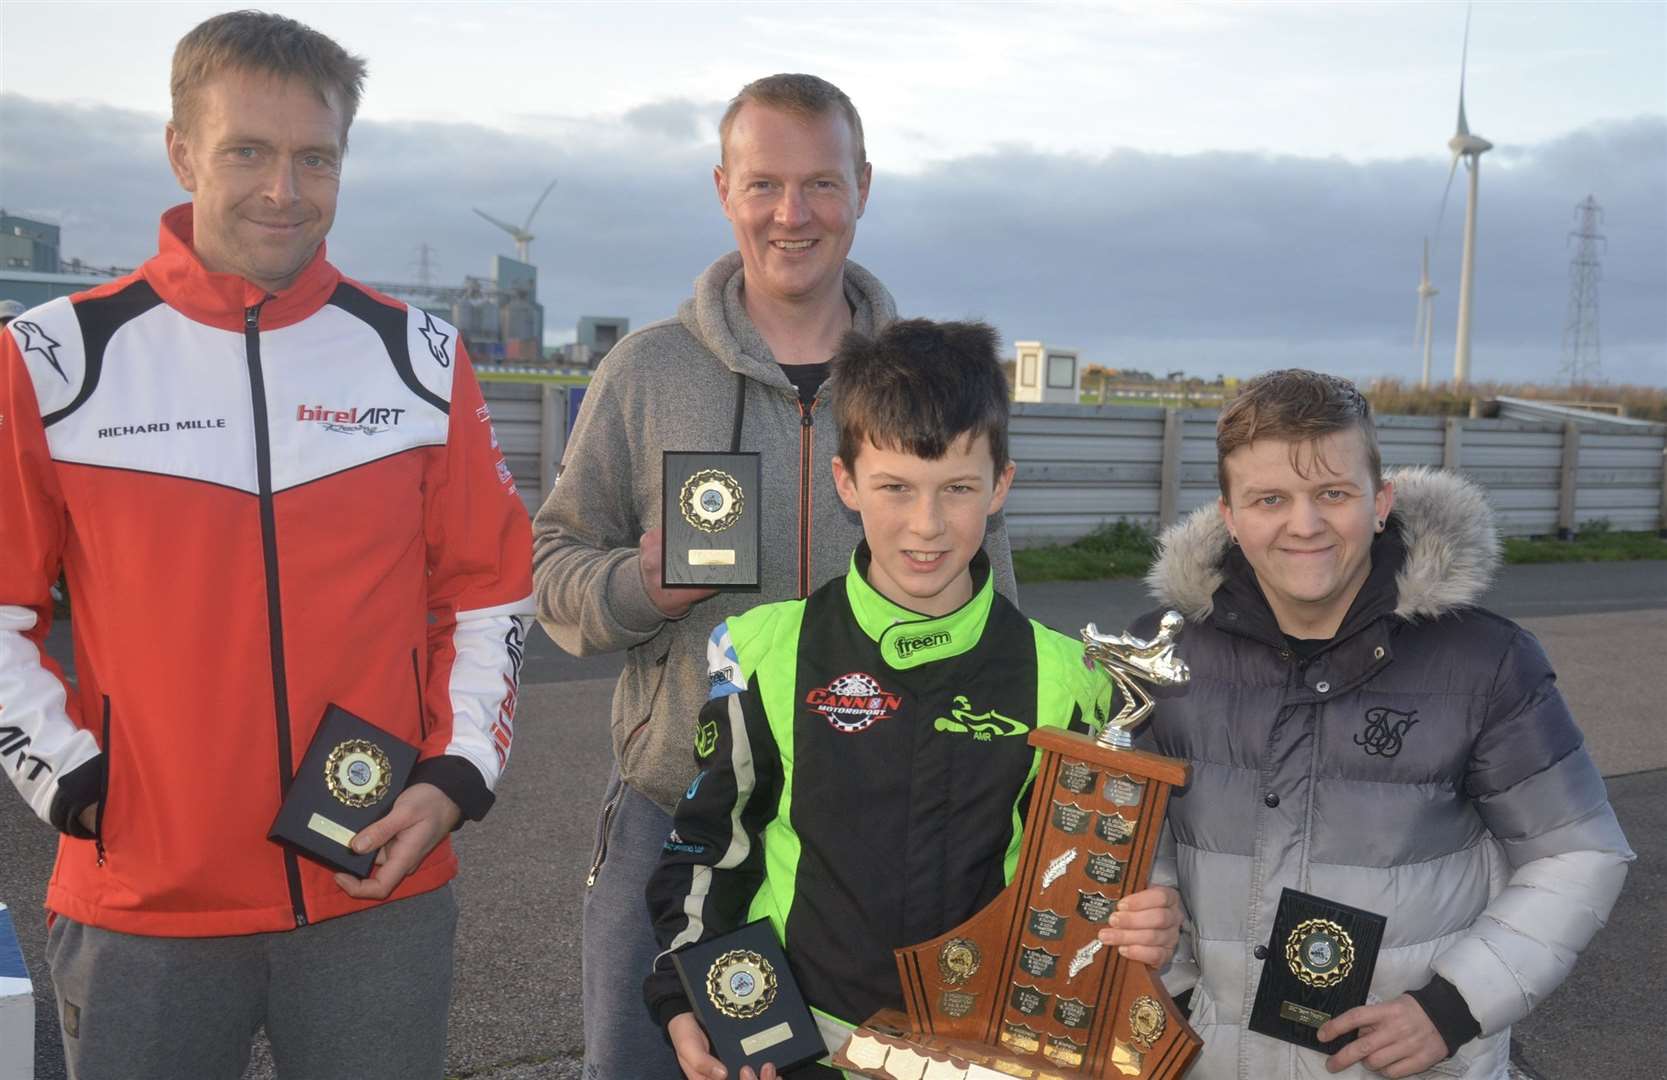 GKC Team Trophy winners (left) Ryan Cannon, Rik Christie, Aiden MacDonald holding the Trophy and Jonathan Edwards